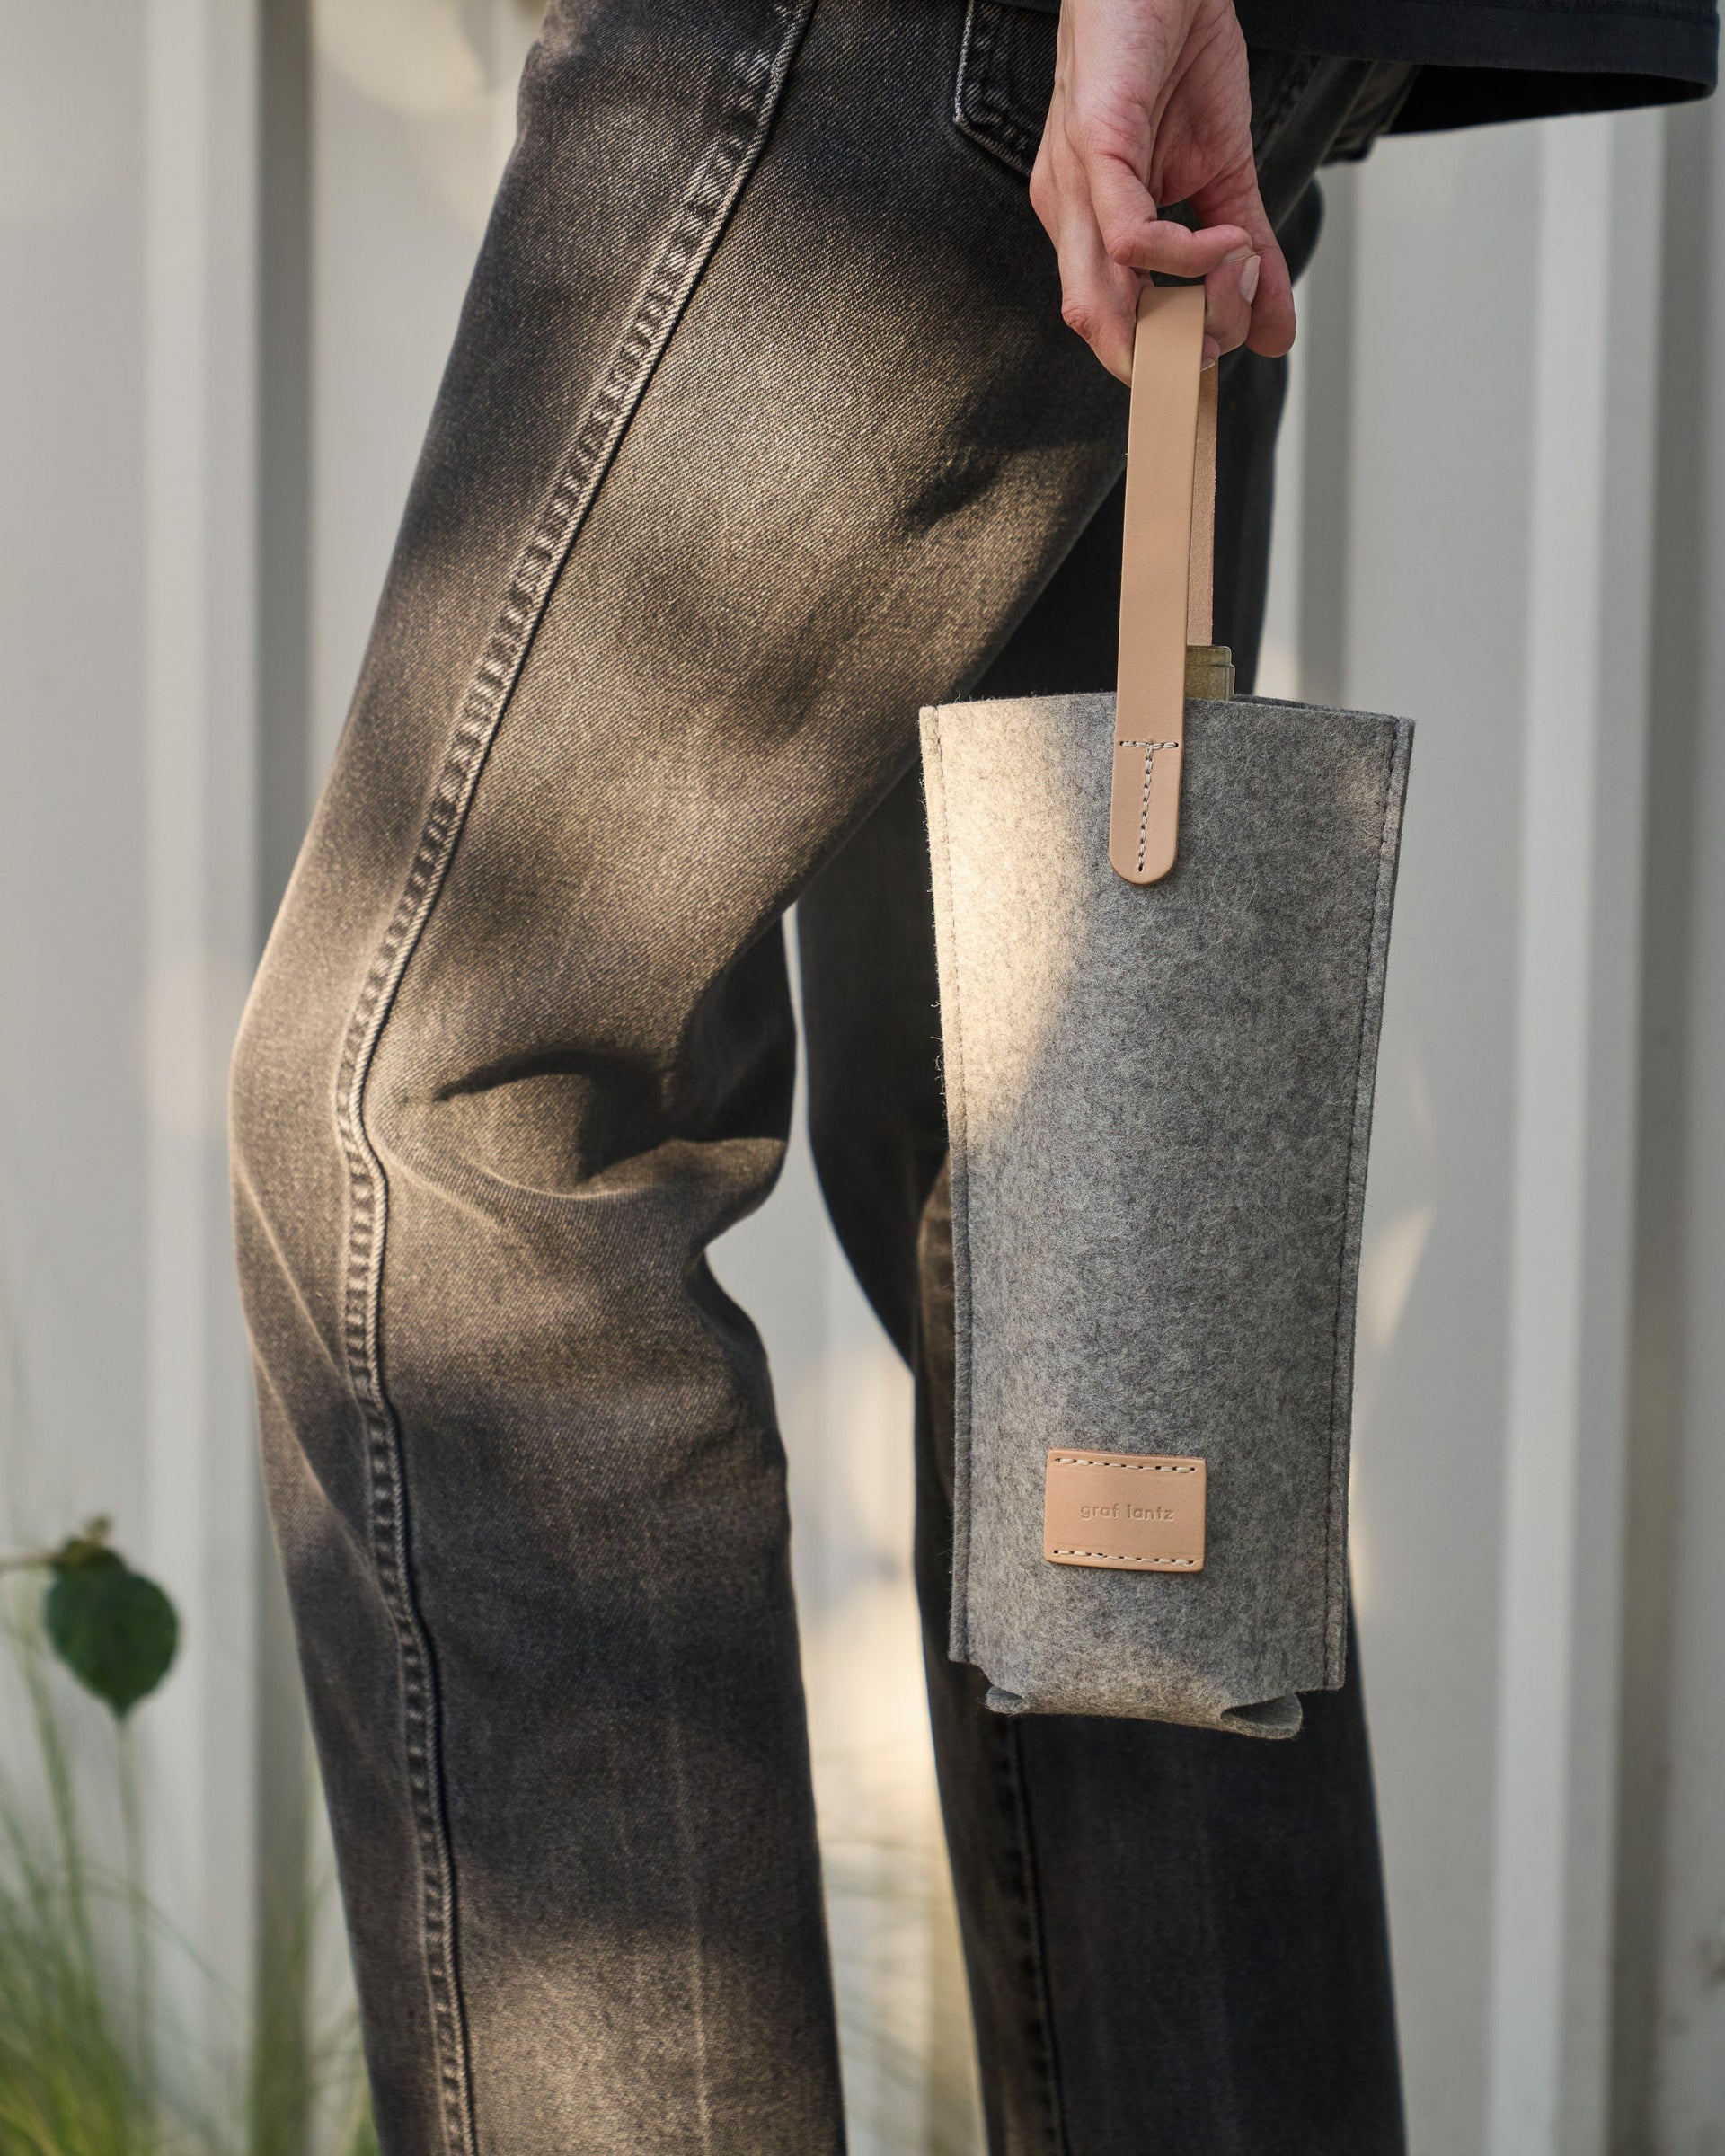 A Hana Merino Wool Bottle Bag carried by a woman, showcasing its light grey and beige colors